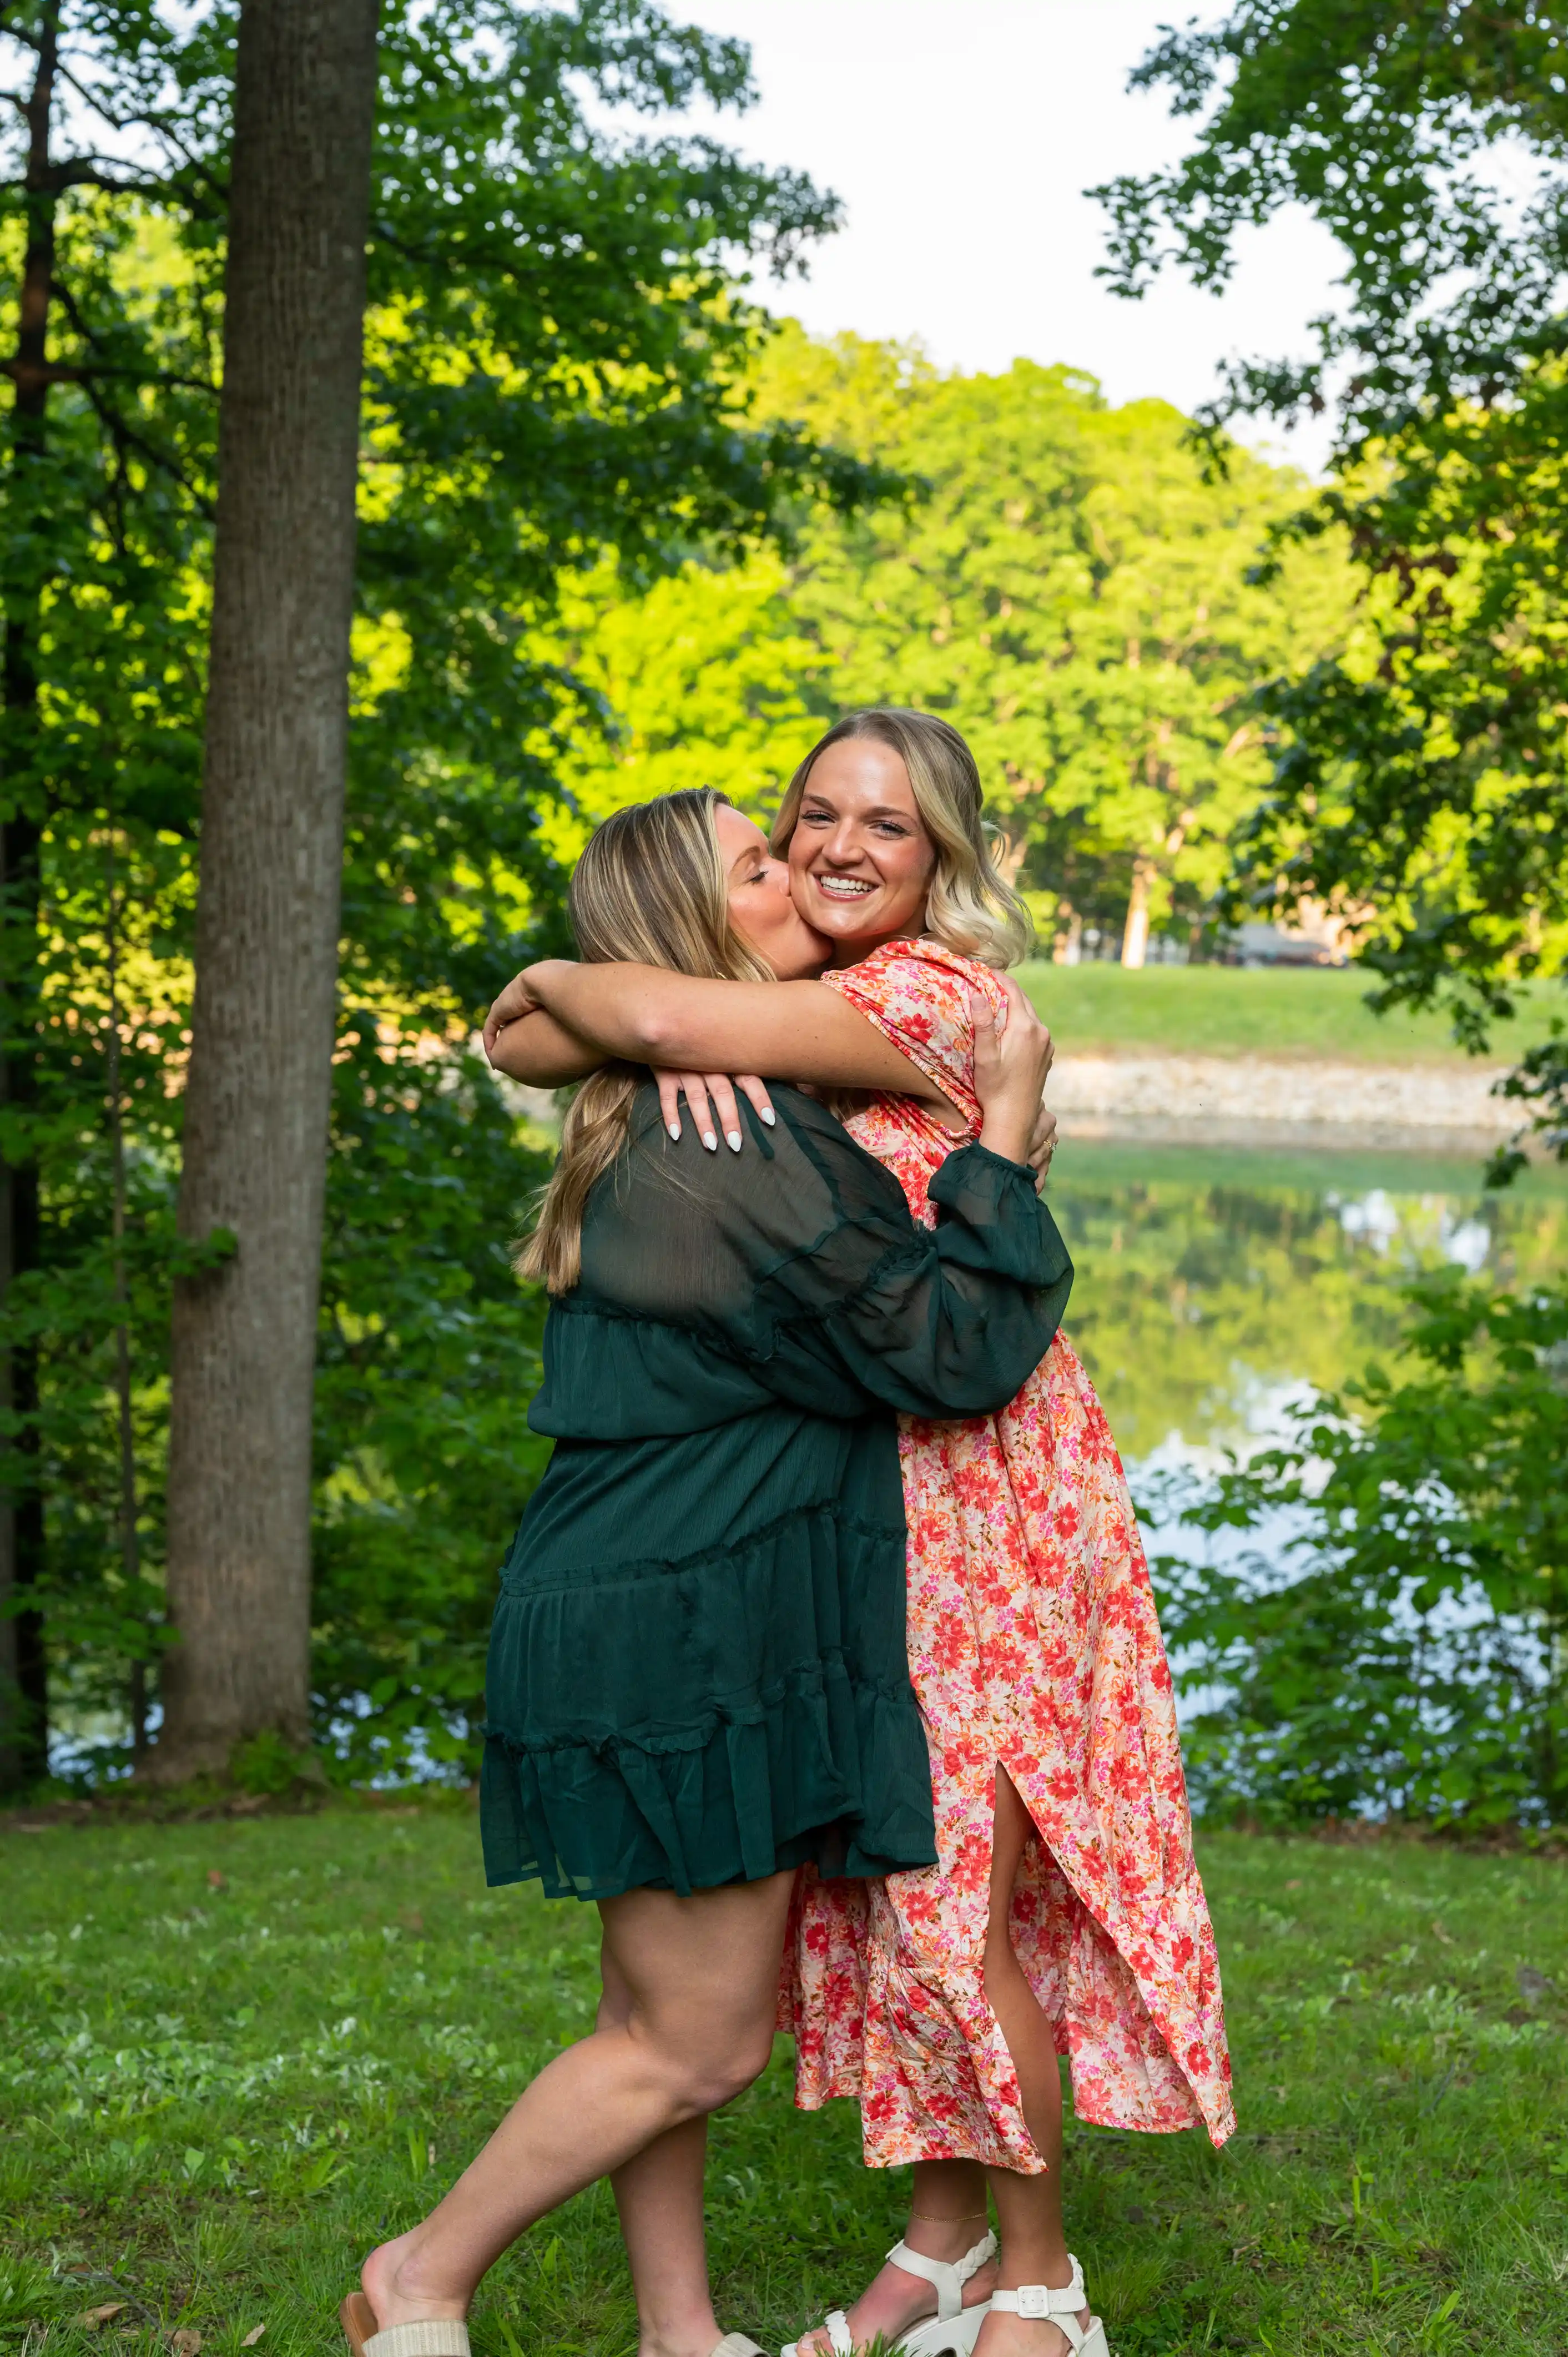 Two women embracing in a joyful hug outdoors with trees and a lake in the background.